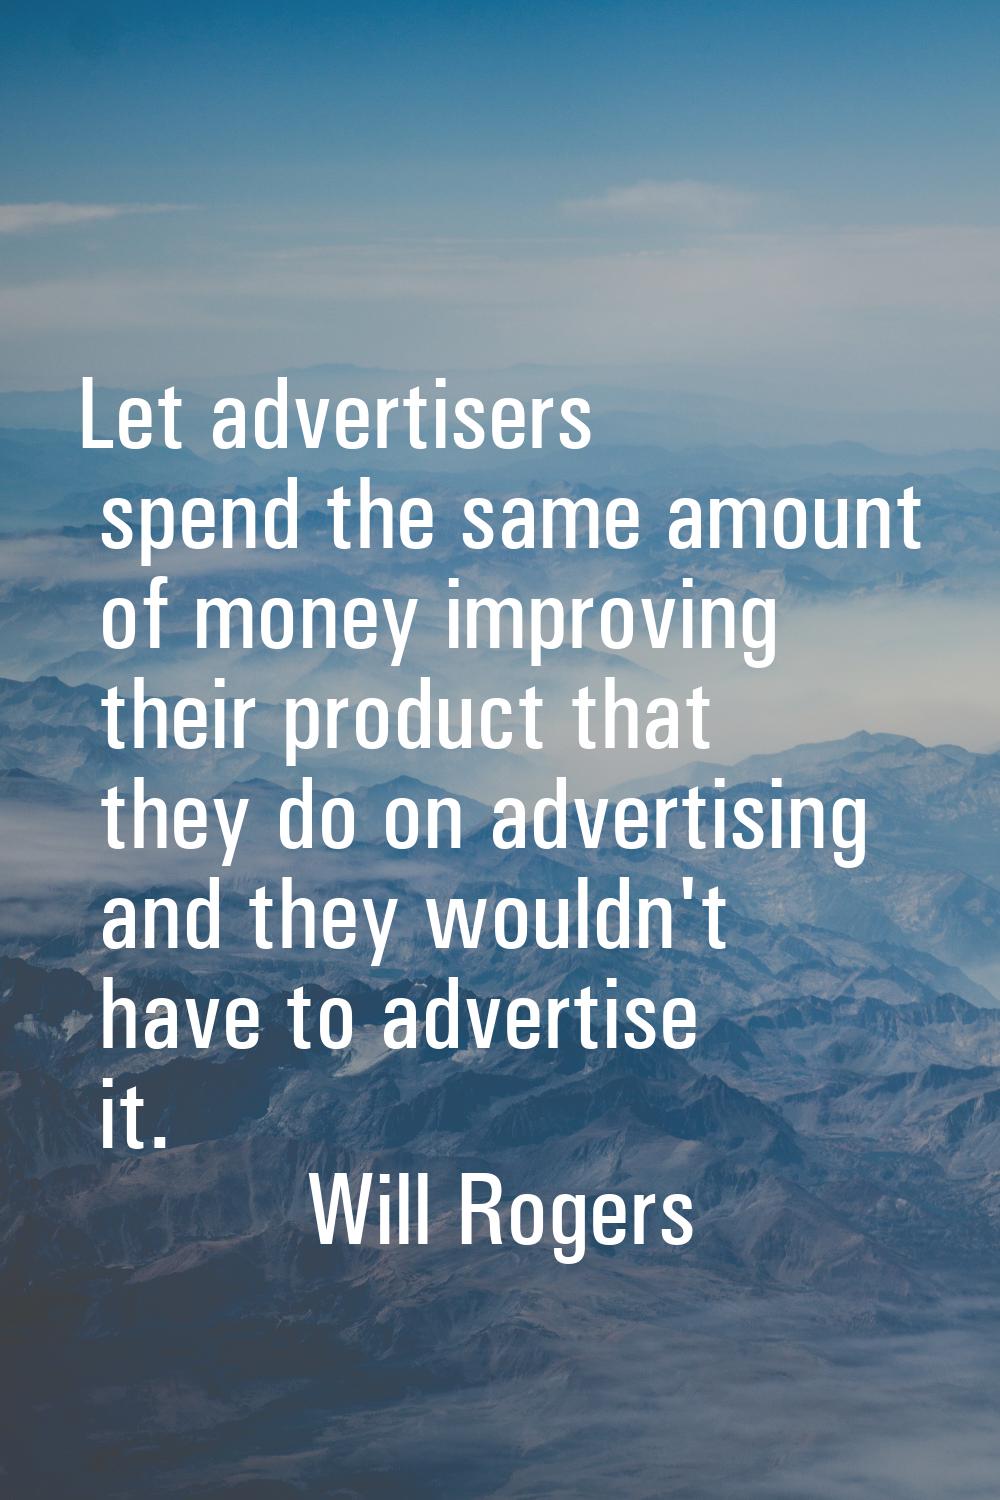 Let advertisers spend the same amount of money improving their product that they do on advertising 